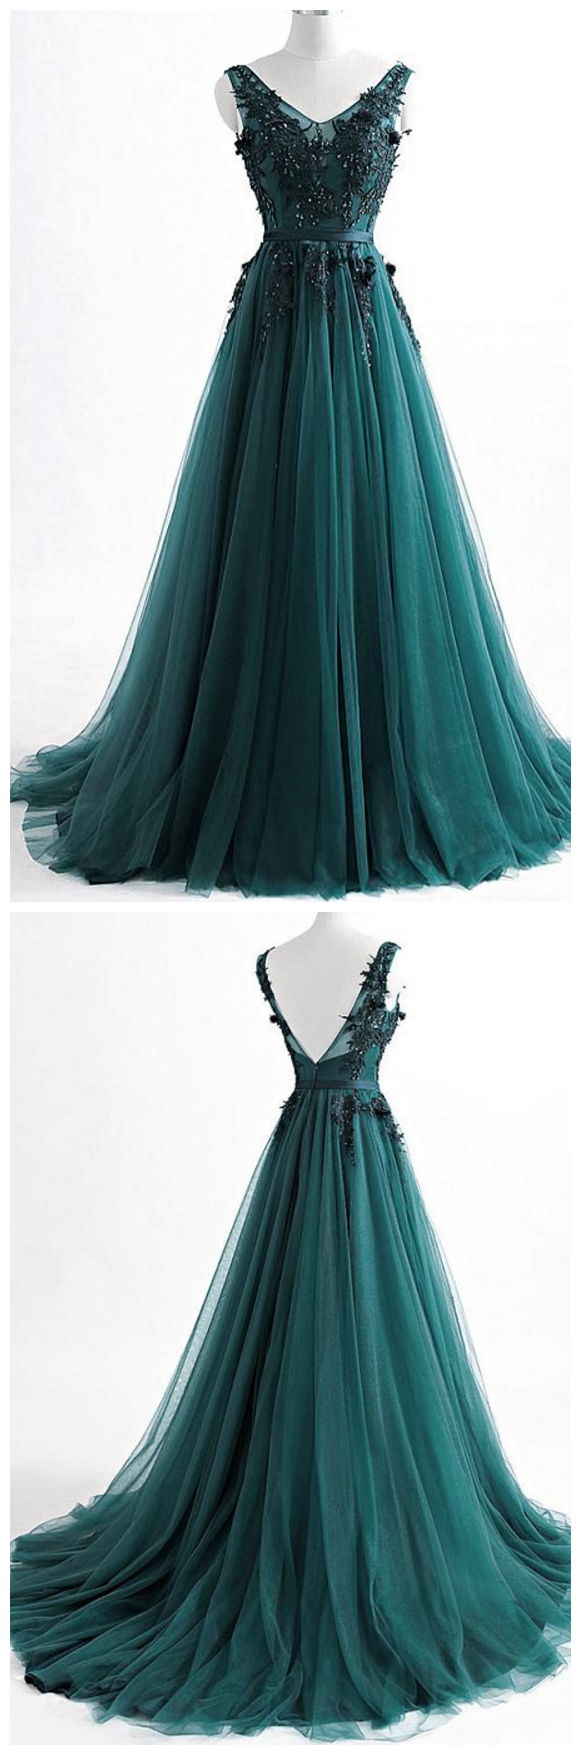 Tulle V-neck Neckline Floor-length A-line Evening Dress With Beaded Lace